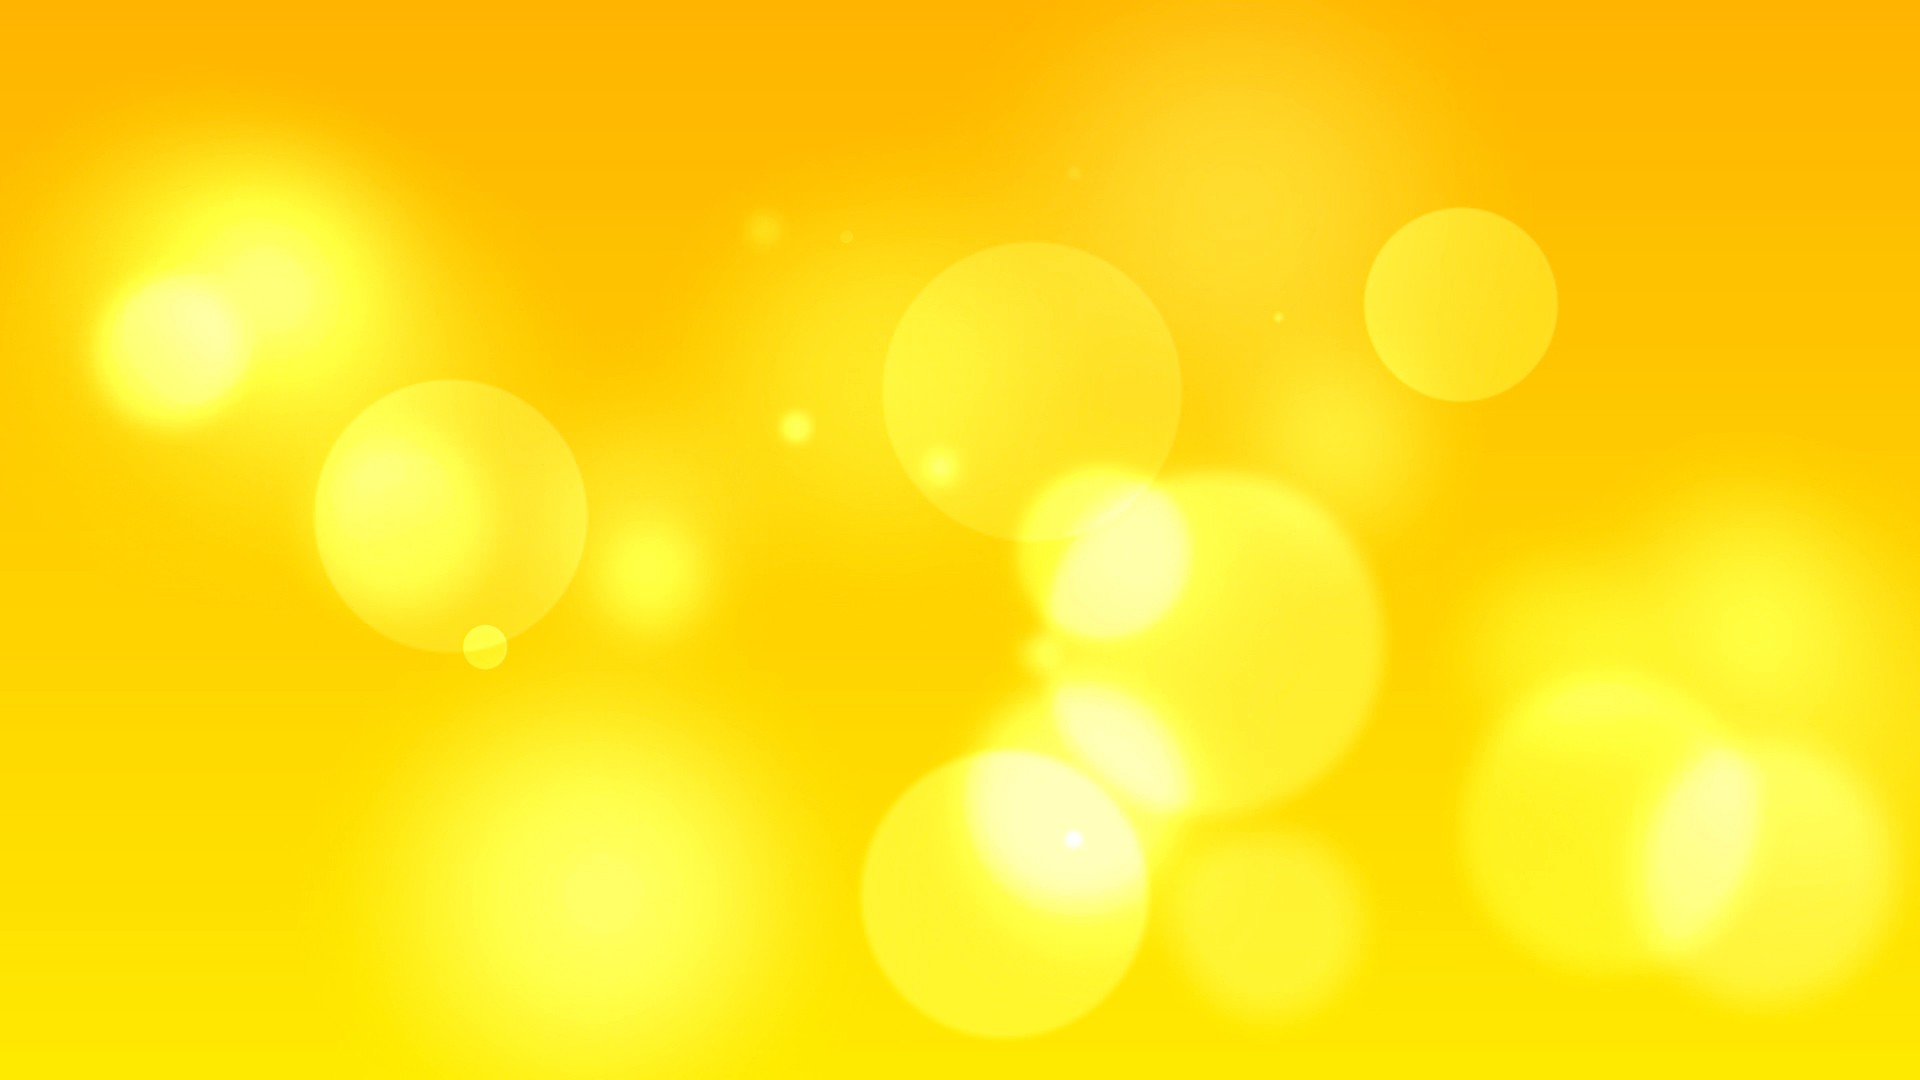 50+ Yellow backgrounds ·① Download free amazing full HD wallpapers for